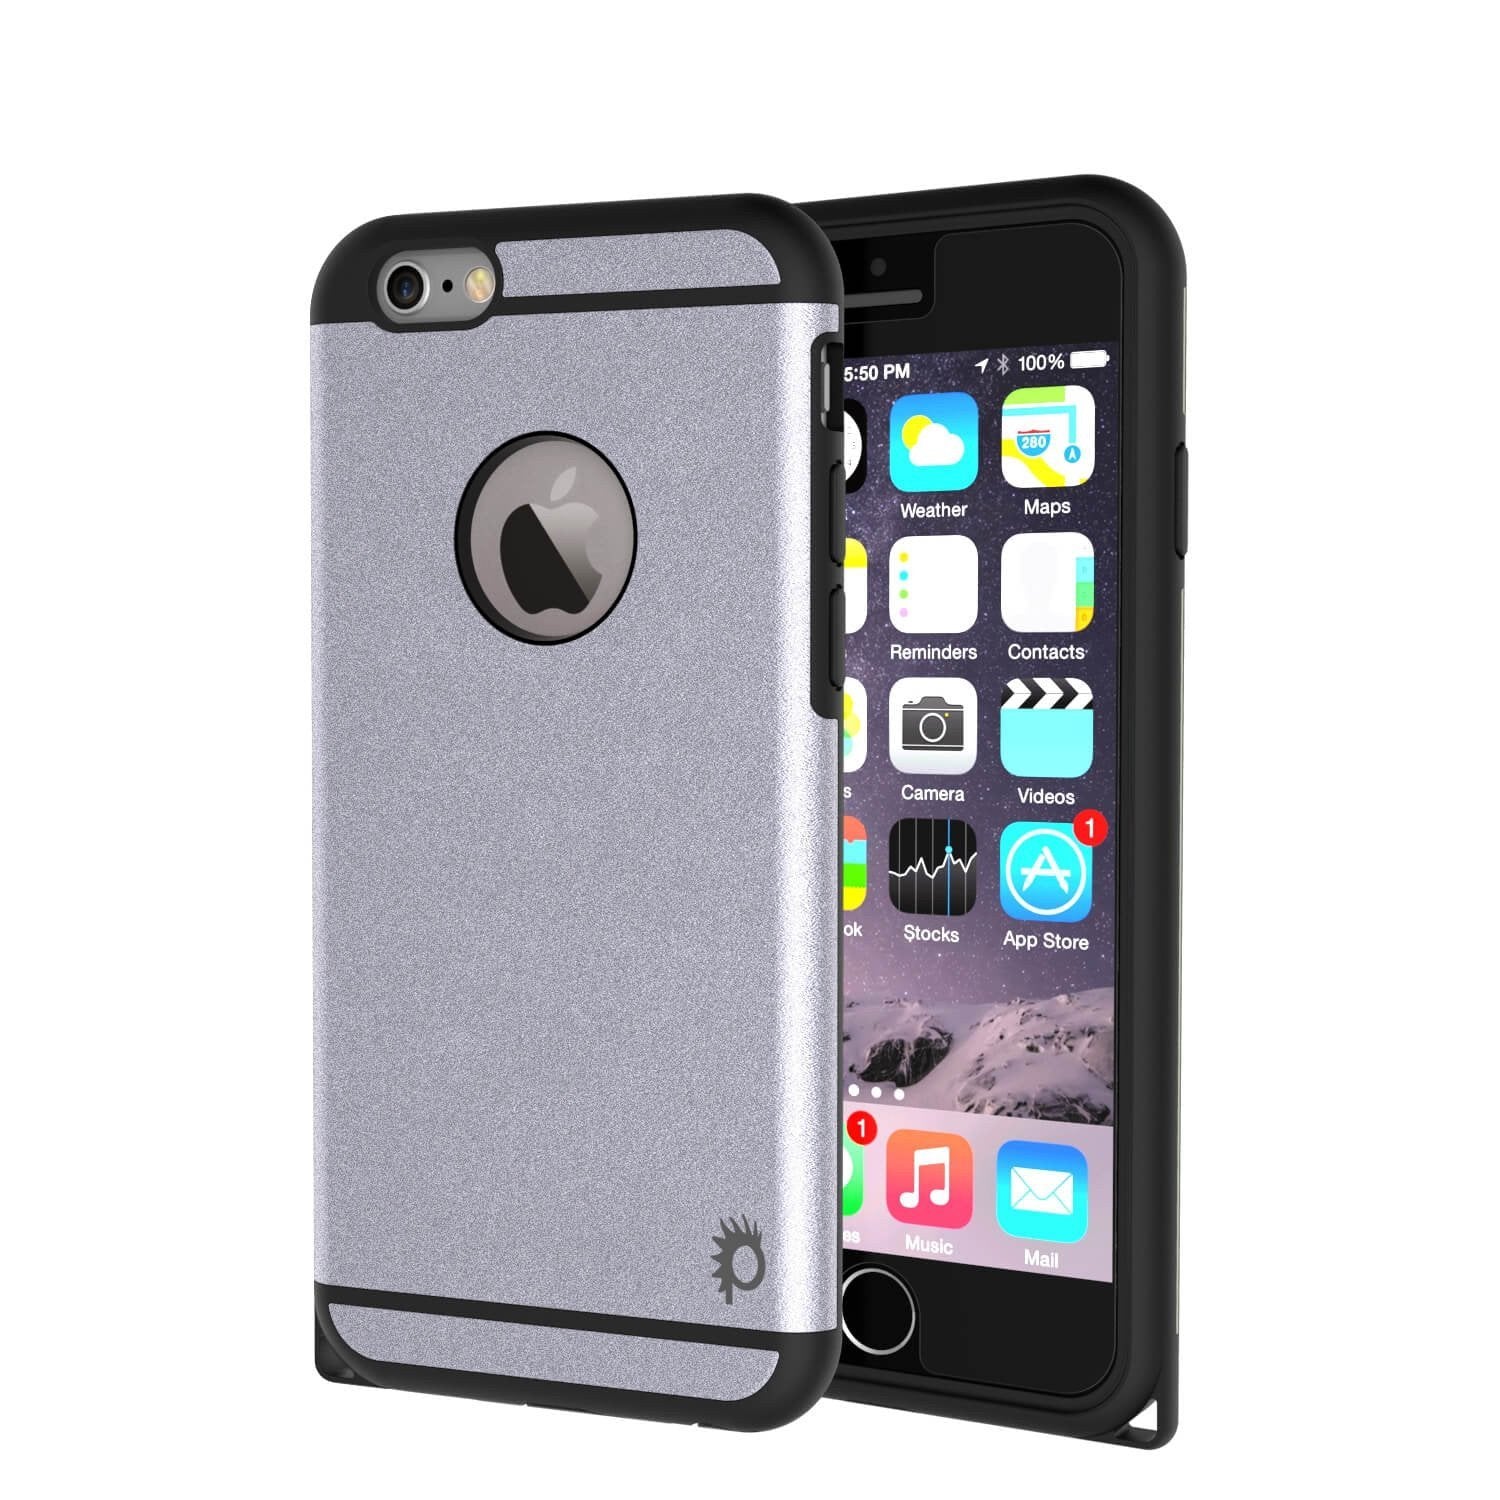 iPhone 5s/5/SE Case PunkCase Galactic SIlver Series Slim w/ Tempered Glass | Lifetime Warranty - PunkCase NZ